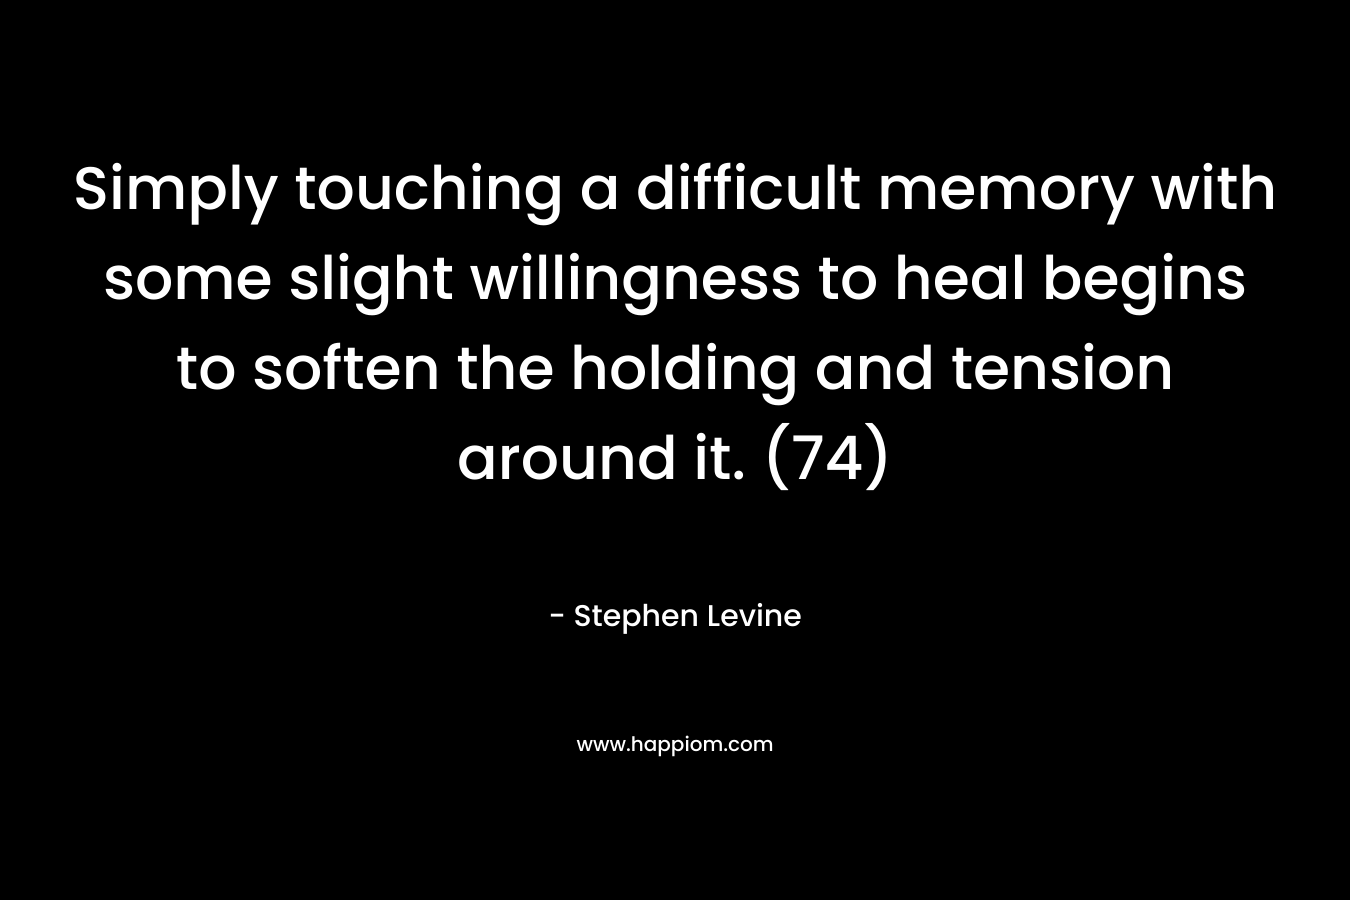 Simply touching a difficult memory with some slight willingness to heal begins to soften the holding and tension around it. (74) – Stephen Levine